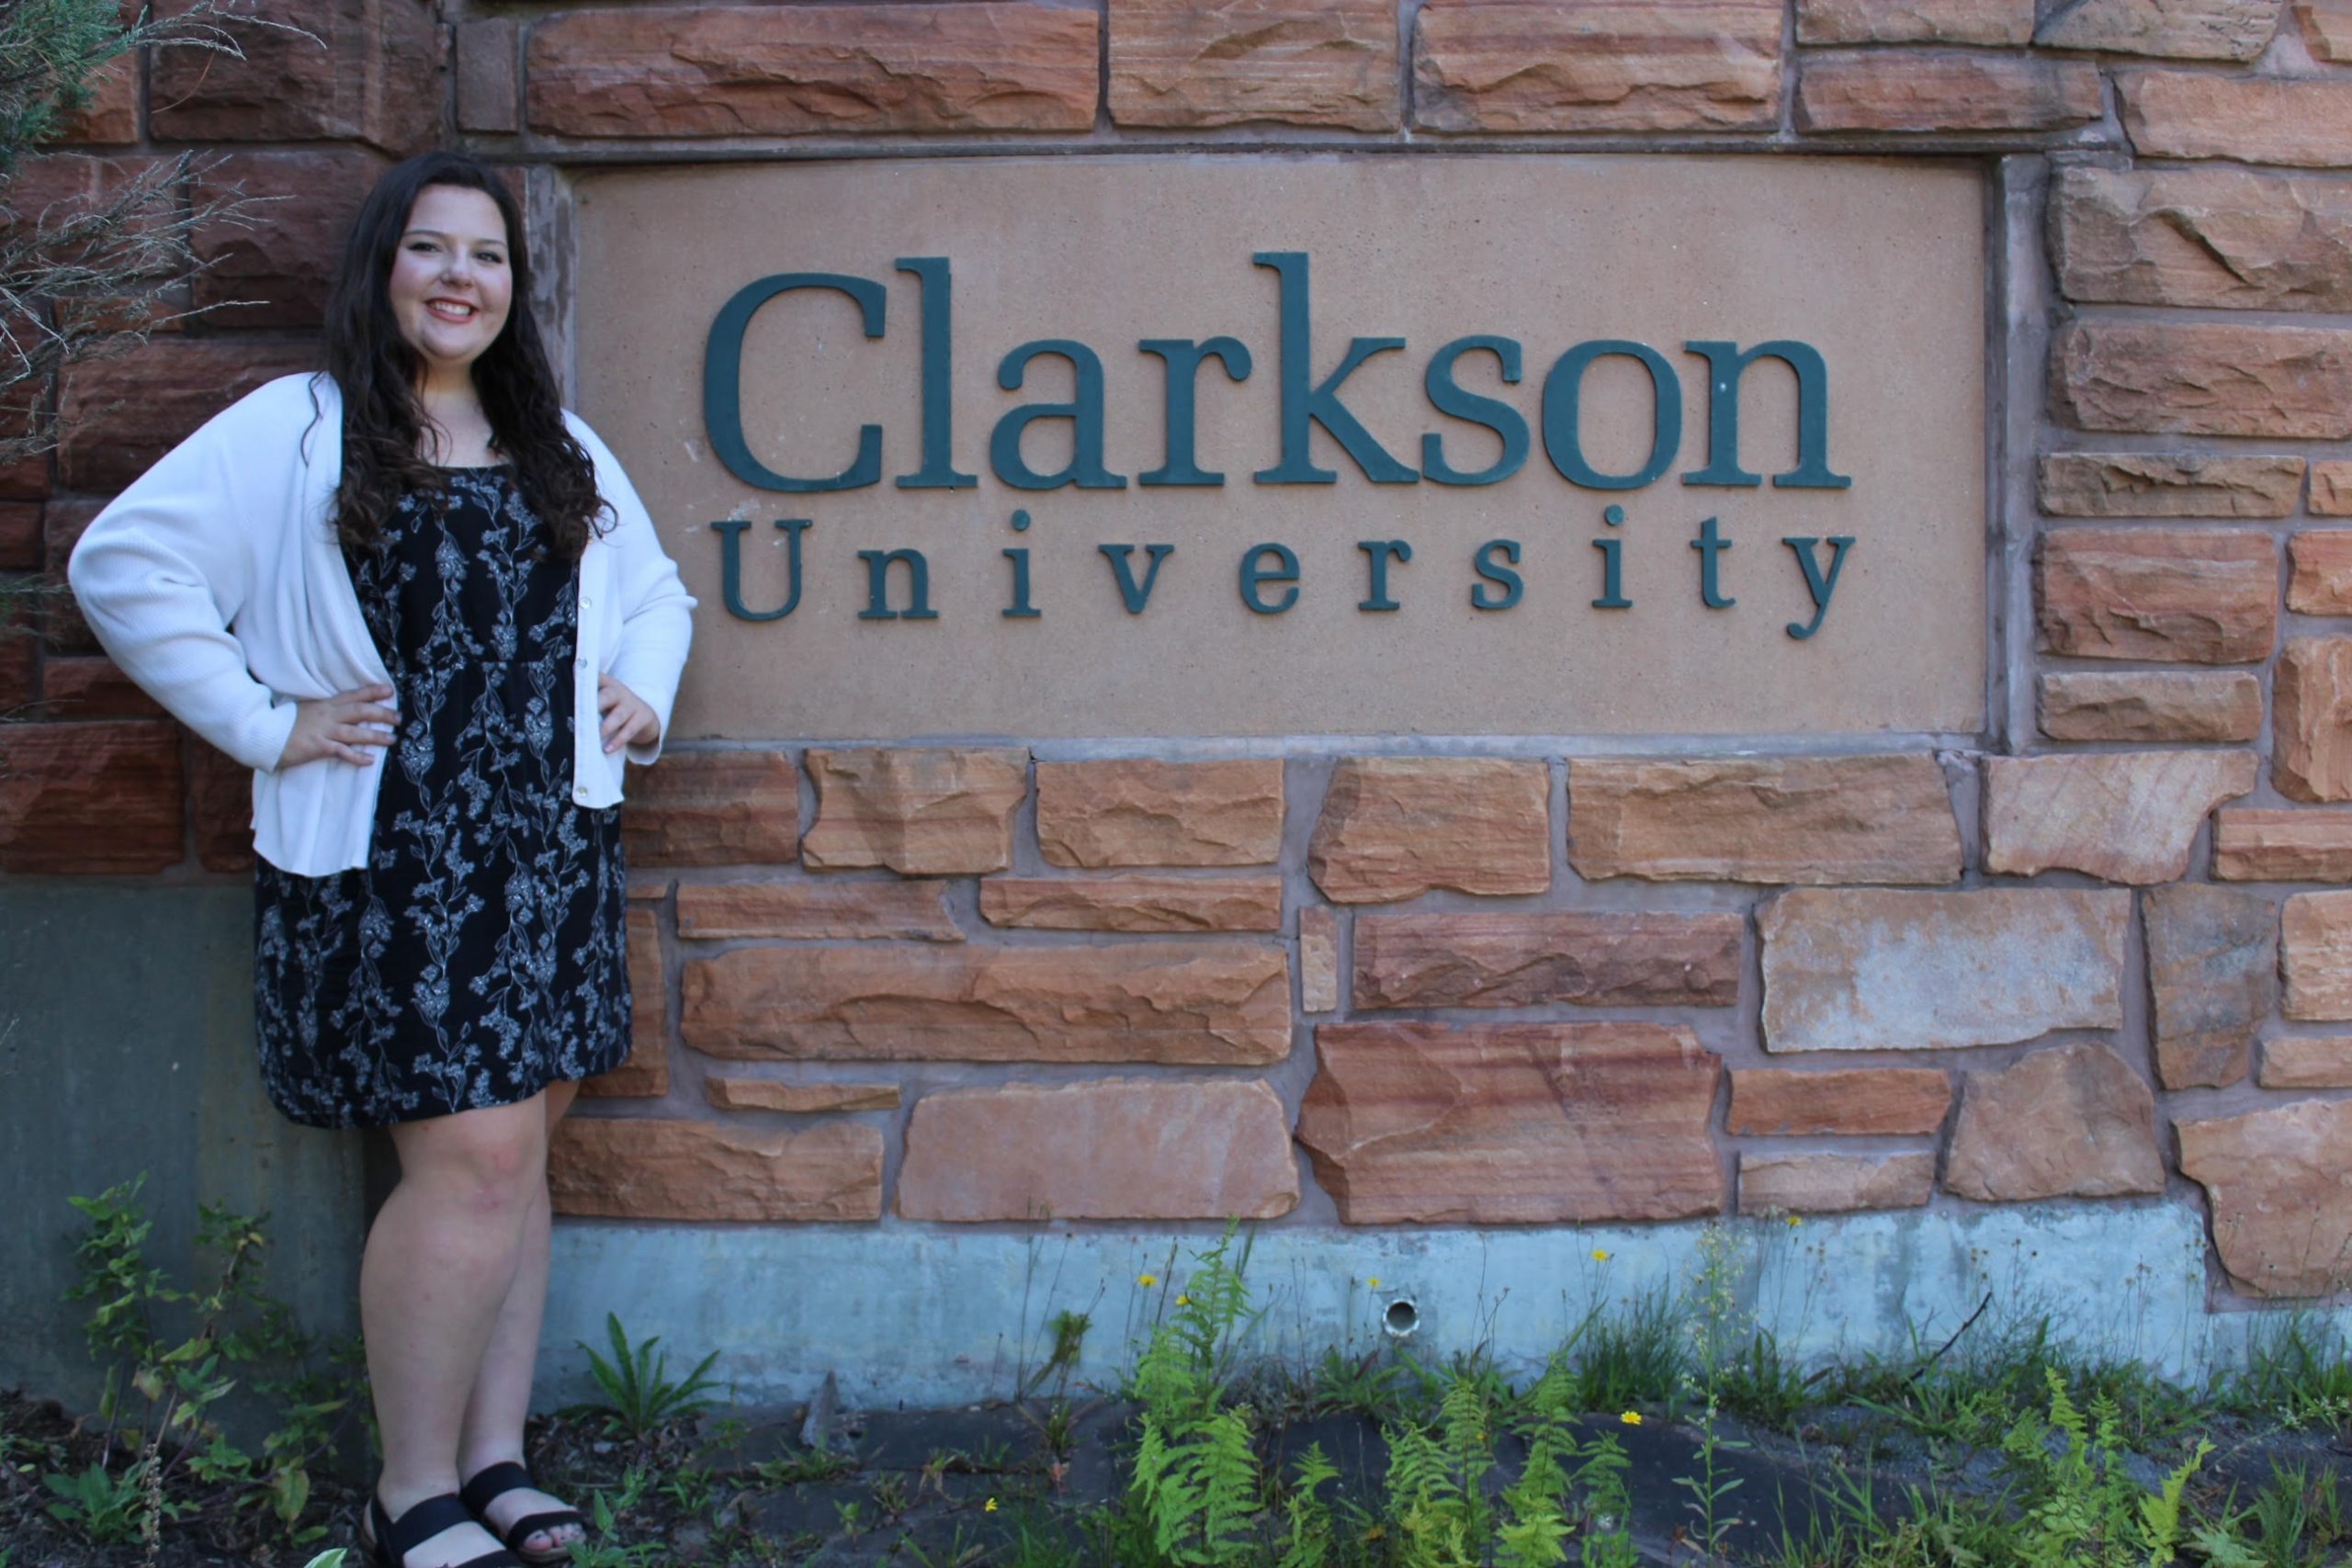 A women standing next to the stone Clarkson university sign